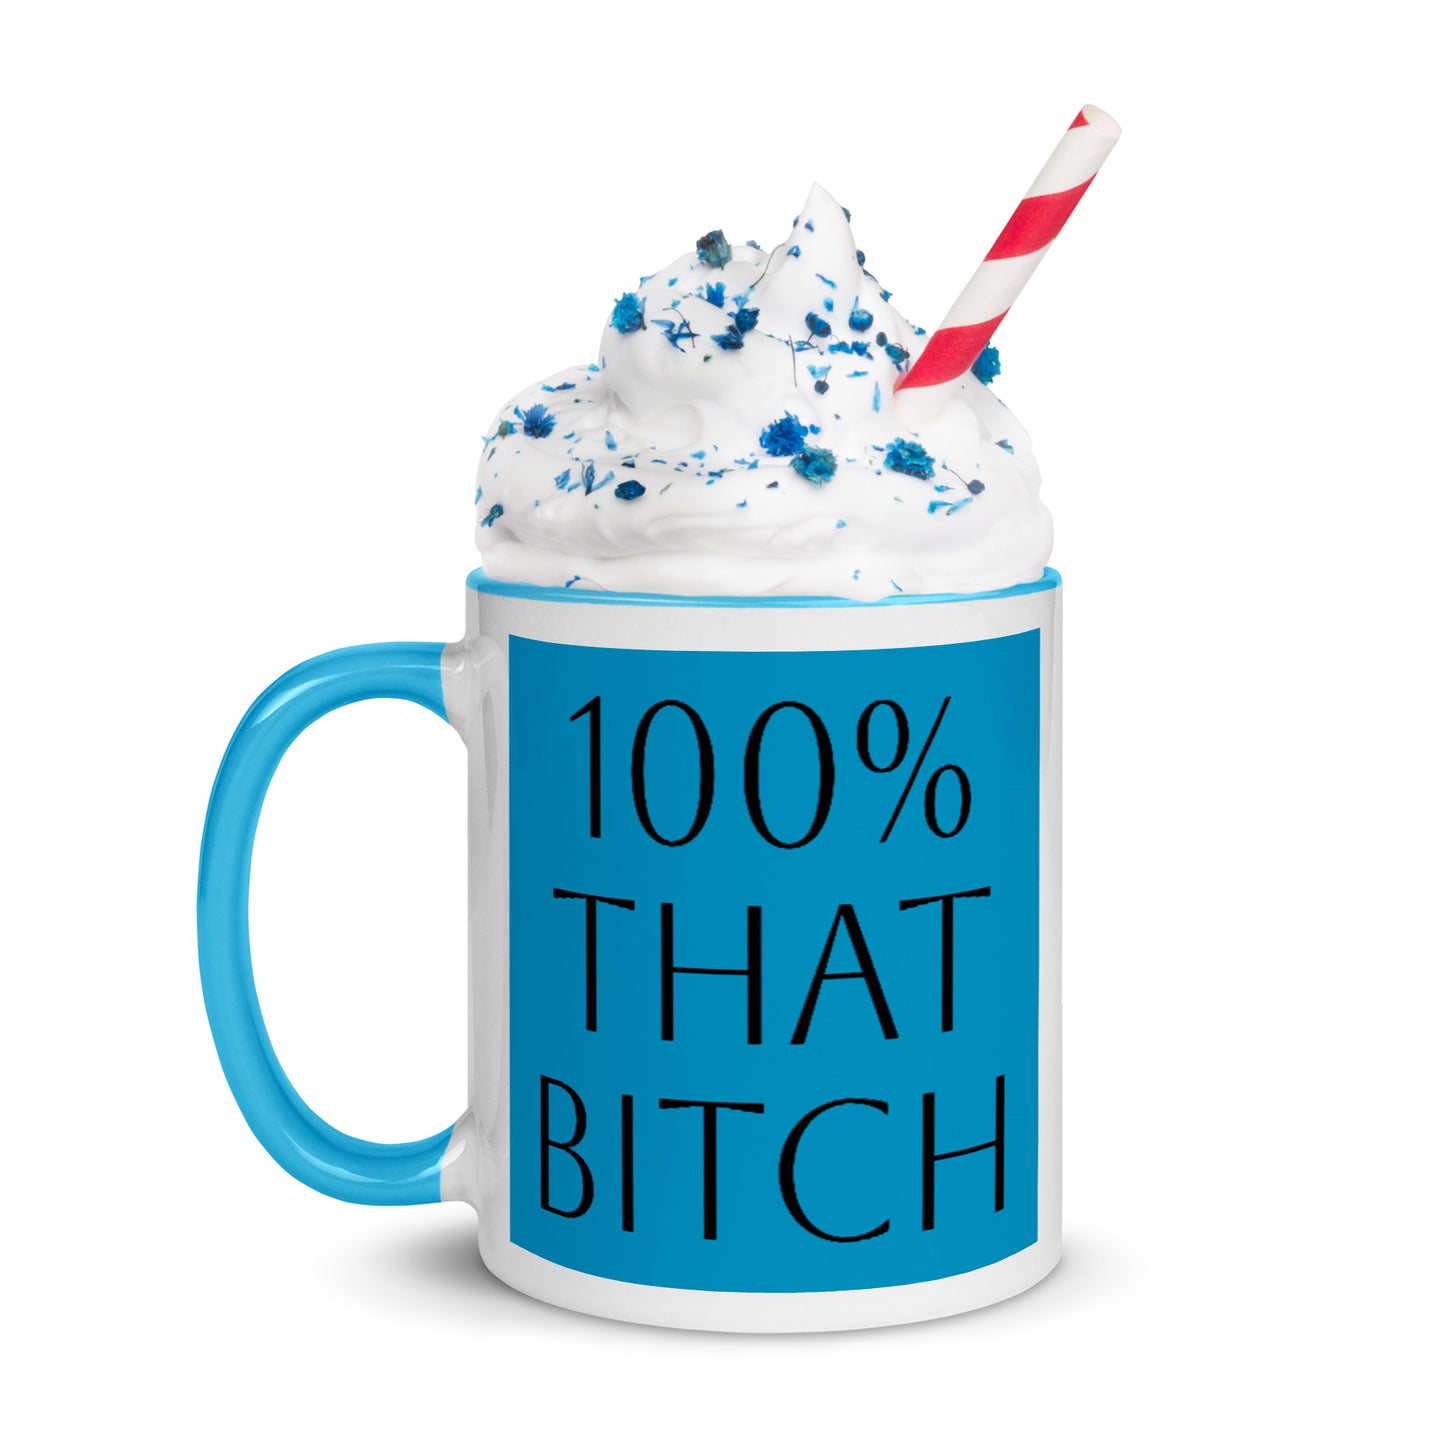 100% That Bitch - Mug with Color Inside